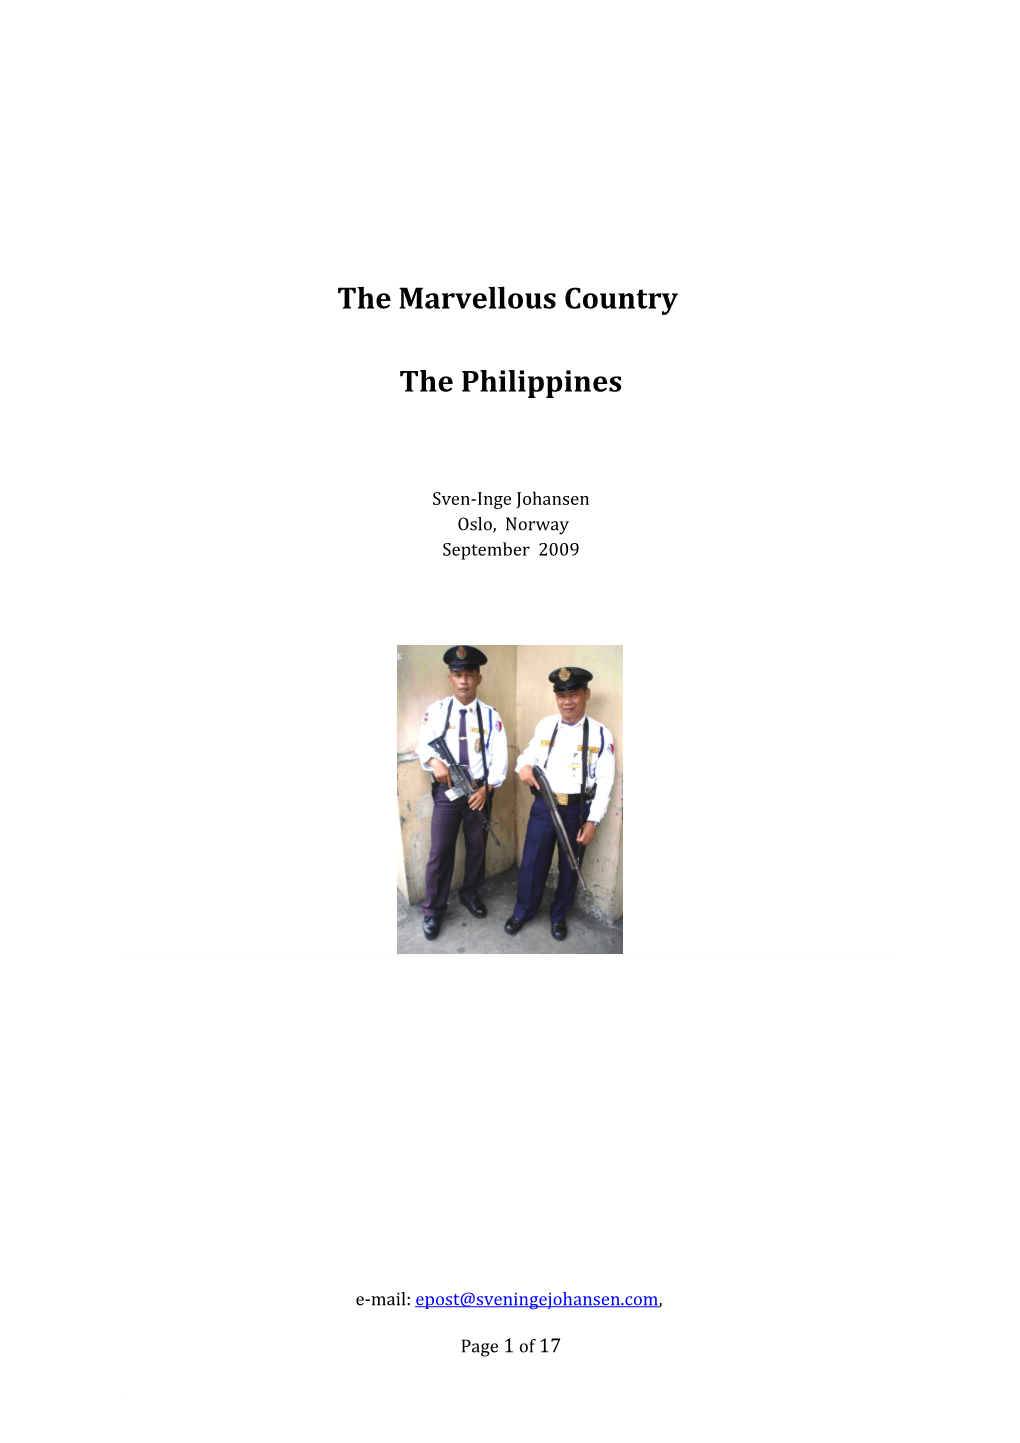 The Marvellous Country, the Philippine